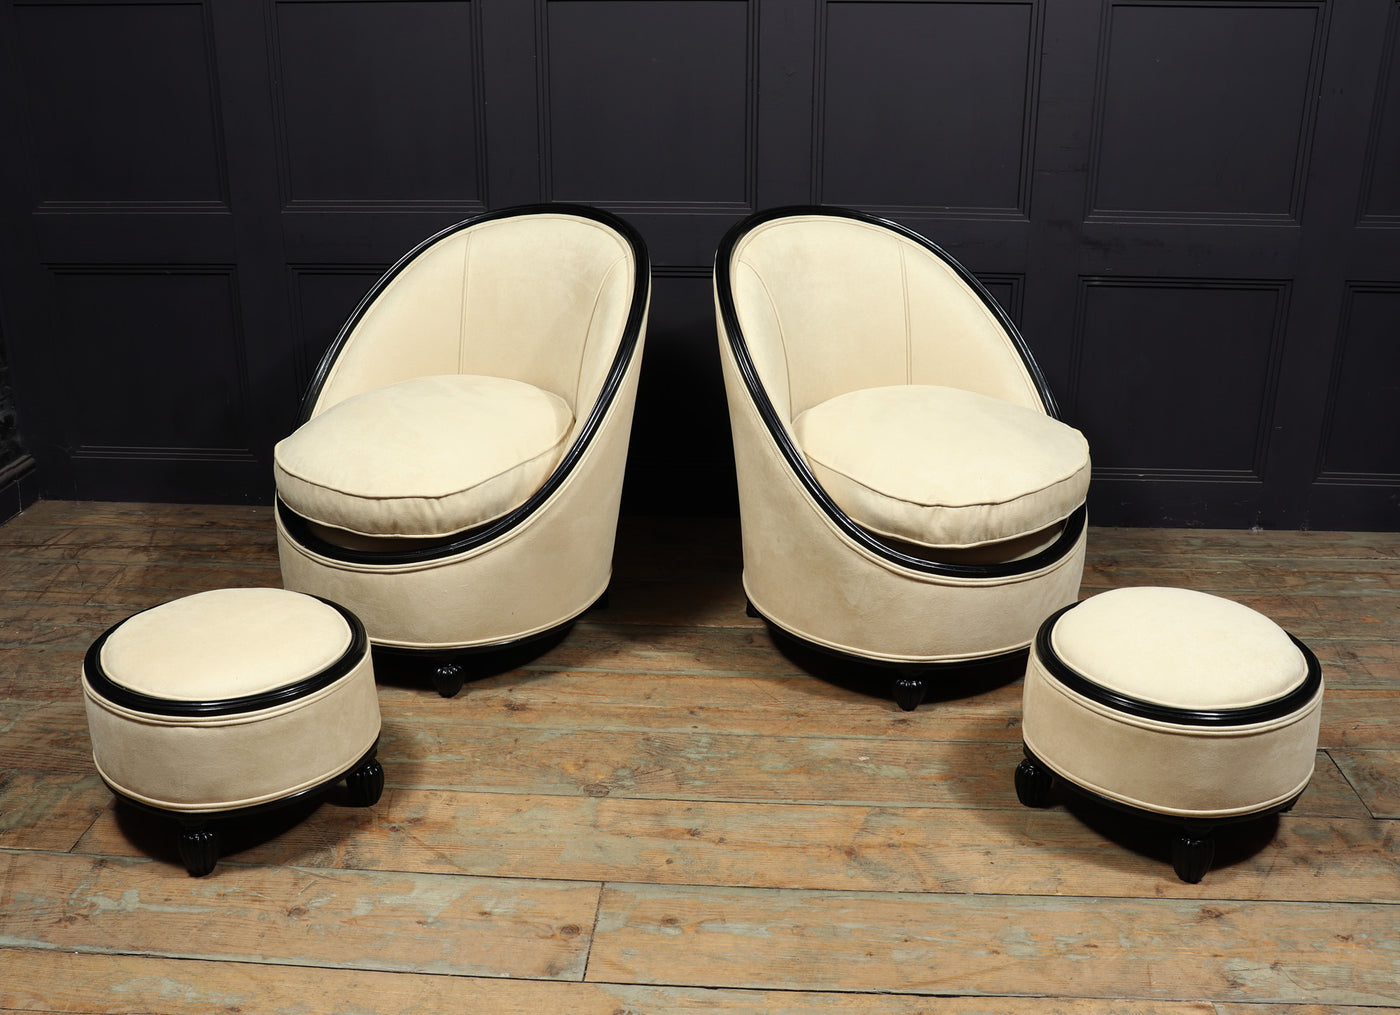 French Art Deco Salon Chairs Manner of Ruhlman c1925